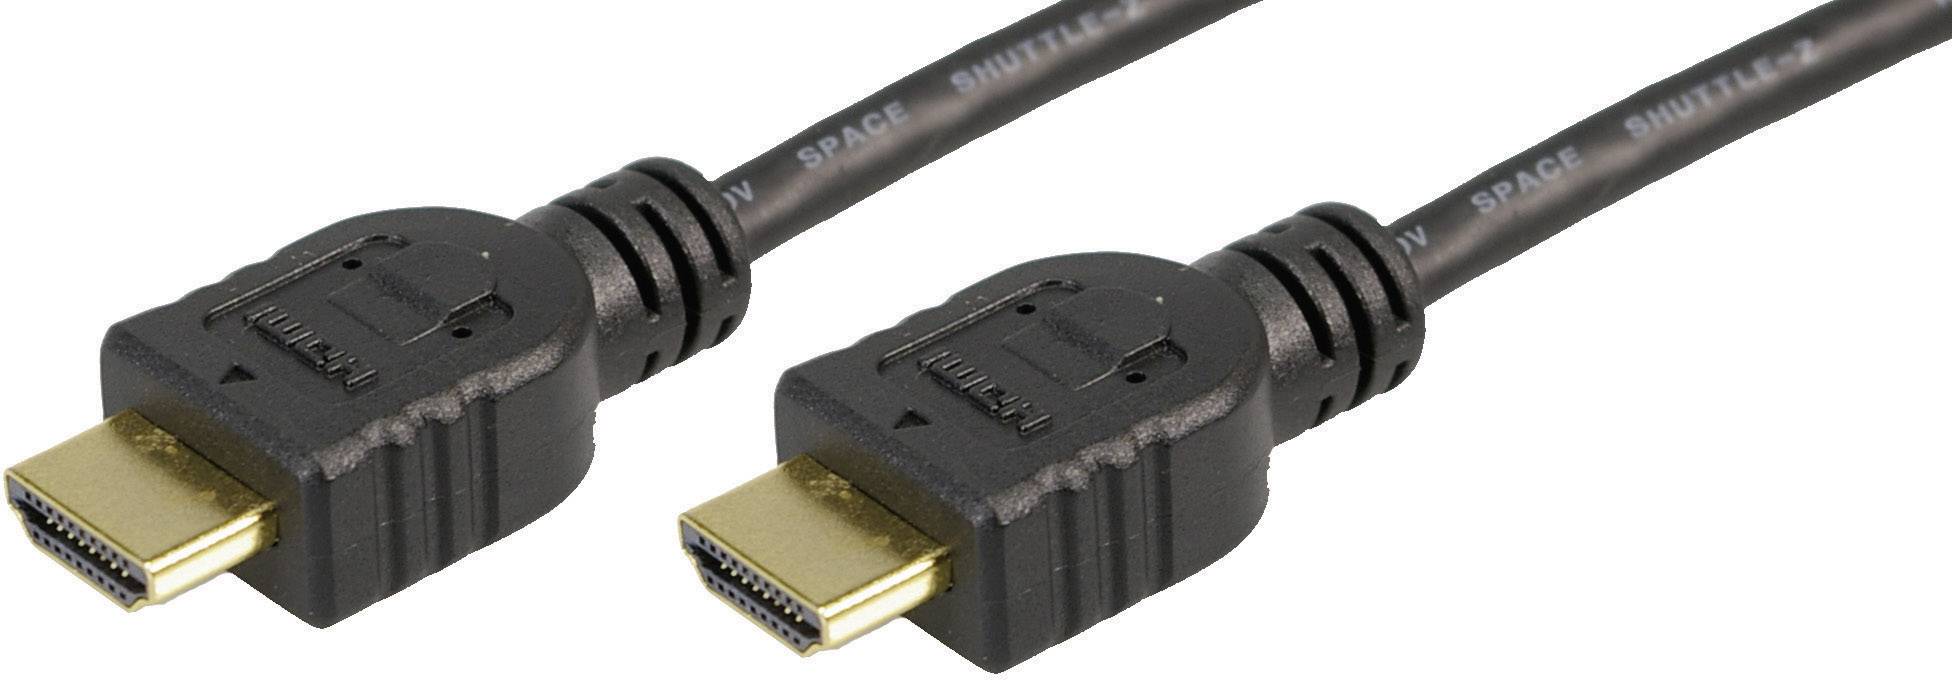 hdmi from mac to tv